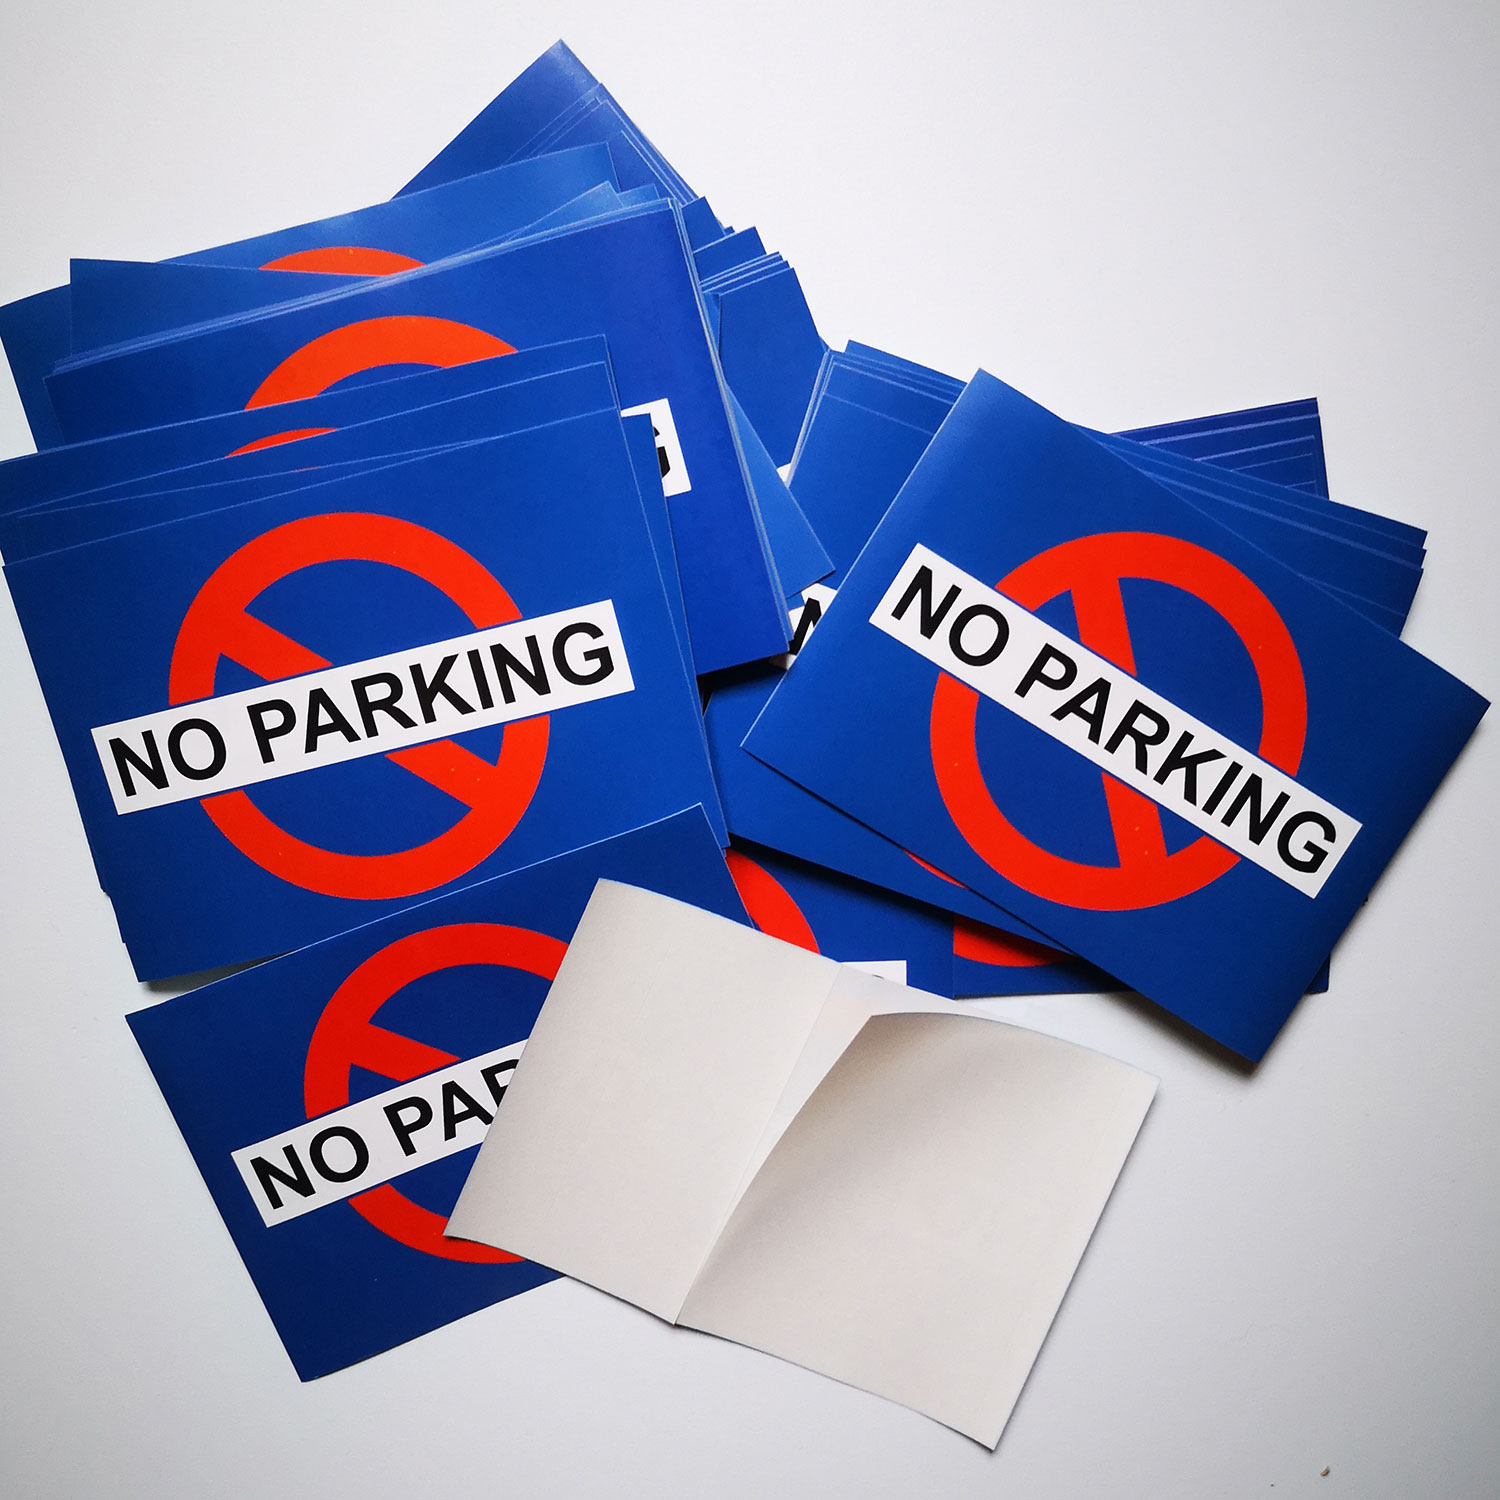 Stickers to stick on poorly parked cars